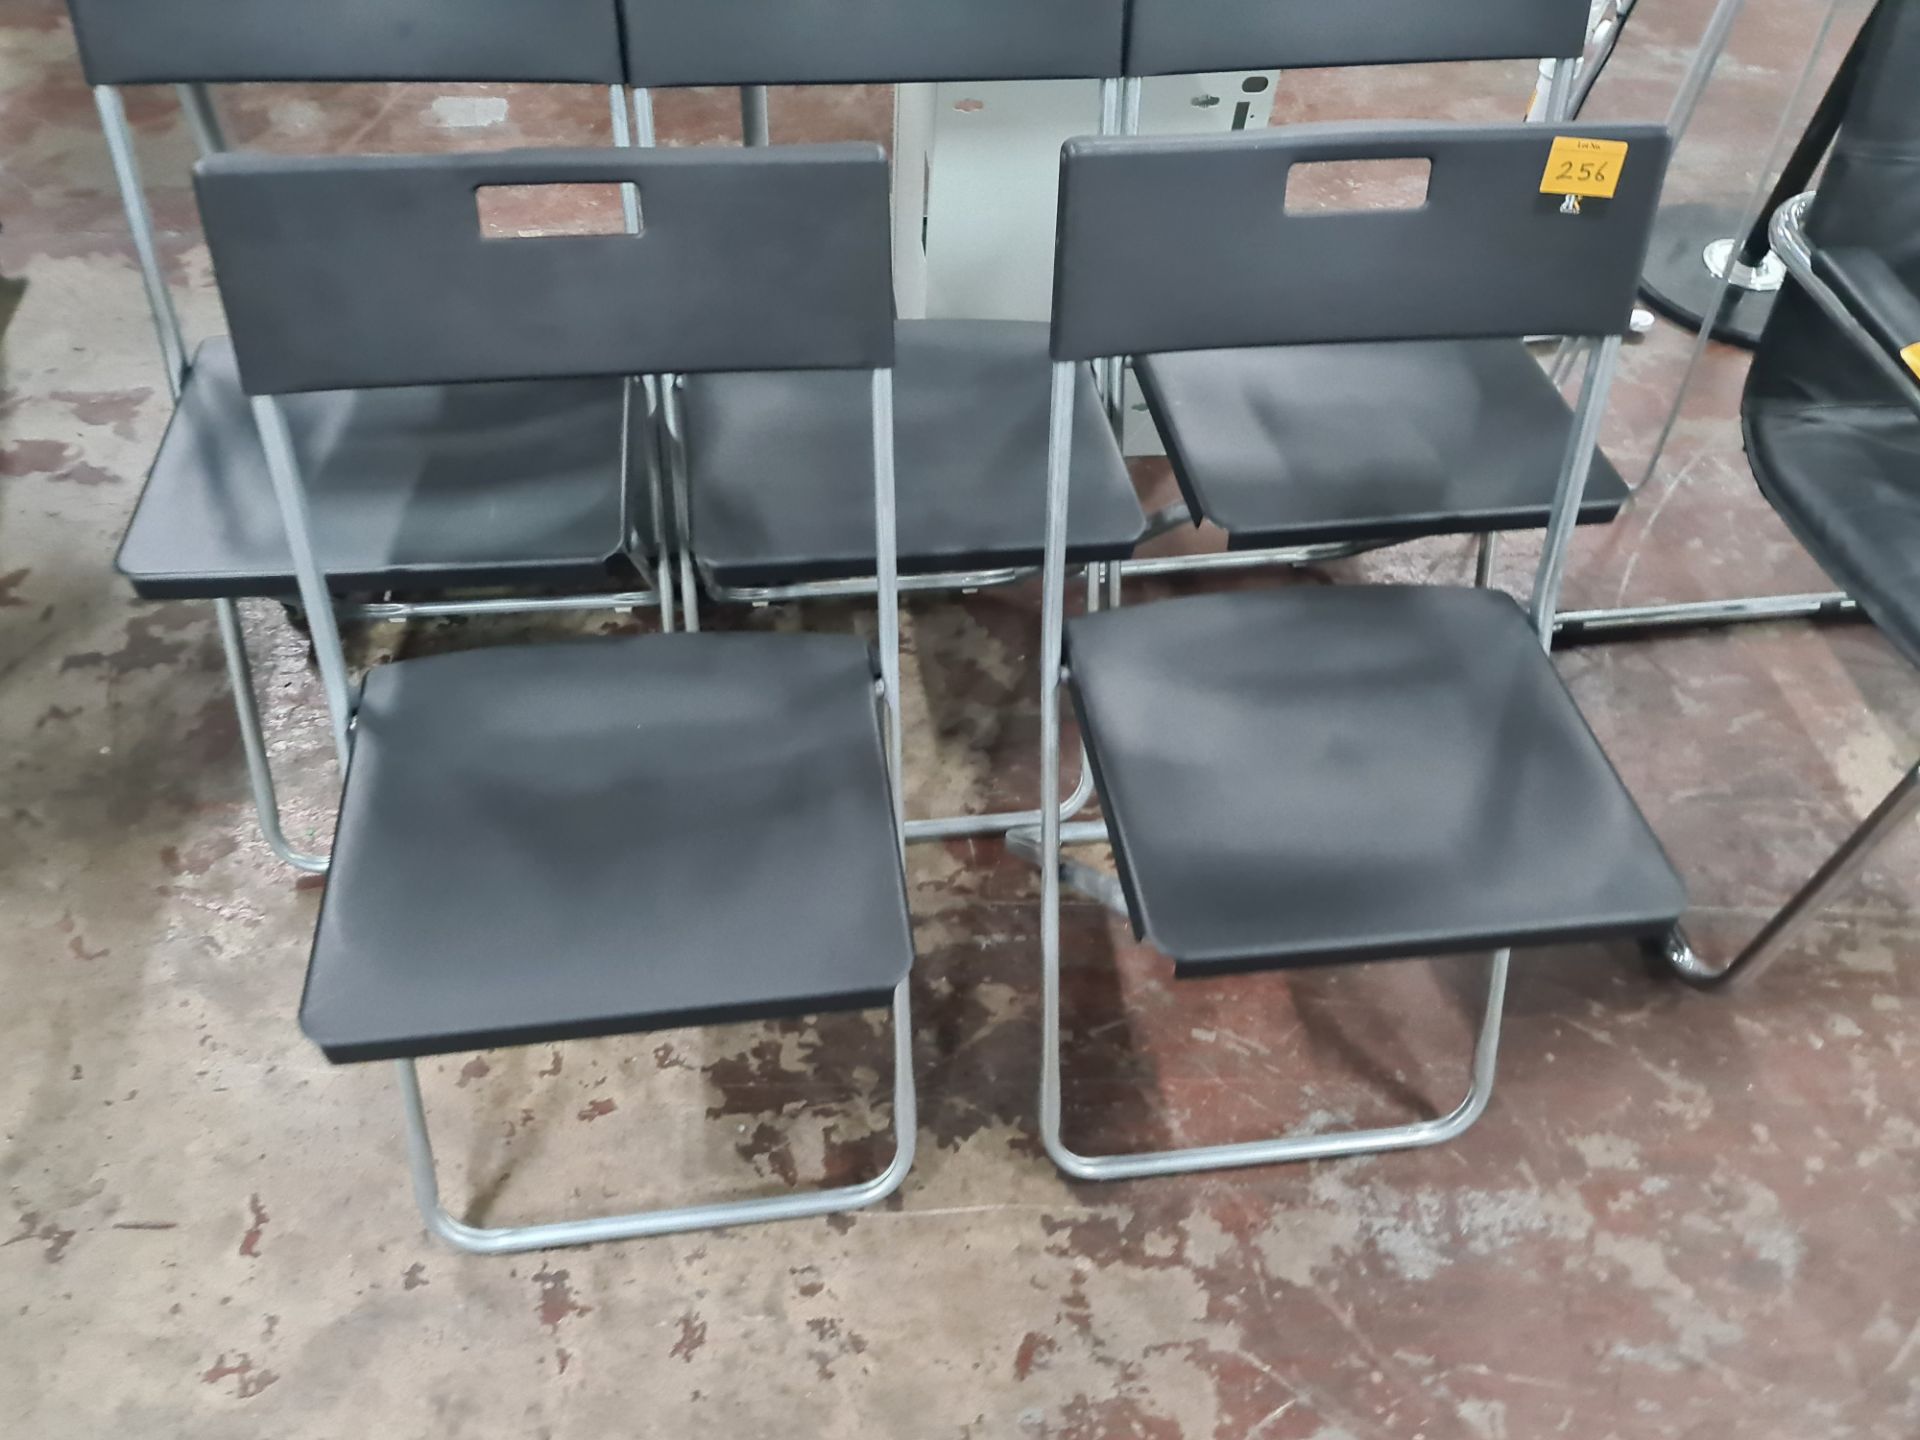 5 off matching black and grey folding chairs - Image 2 of 4